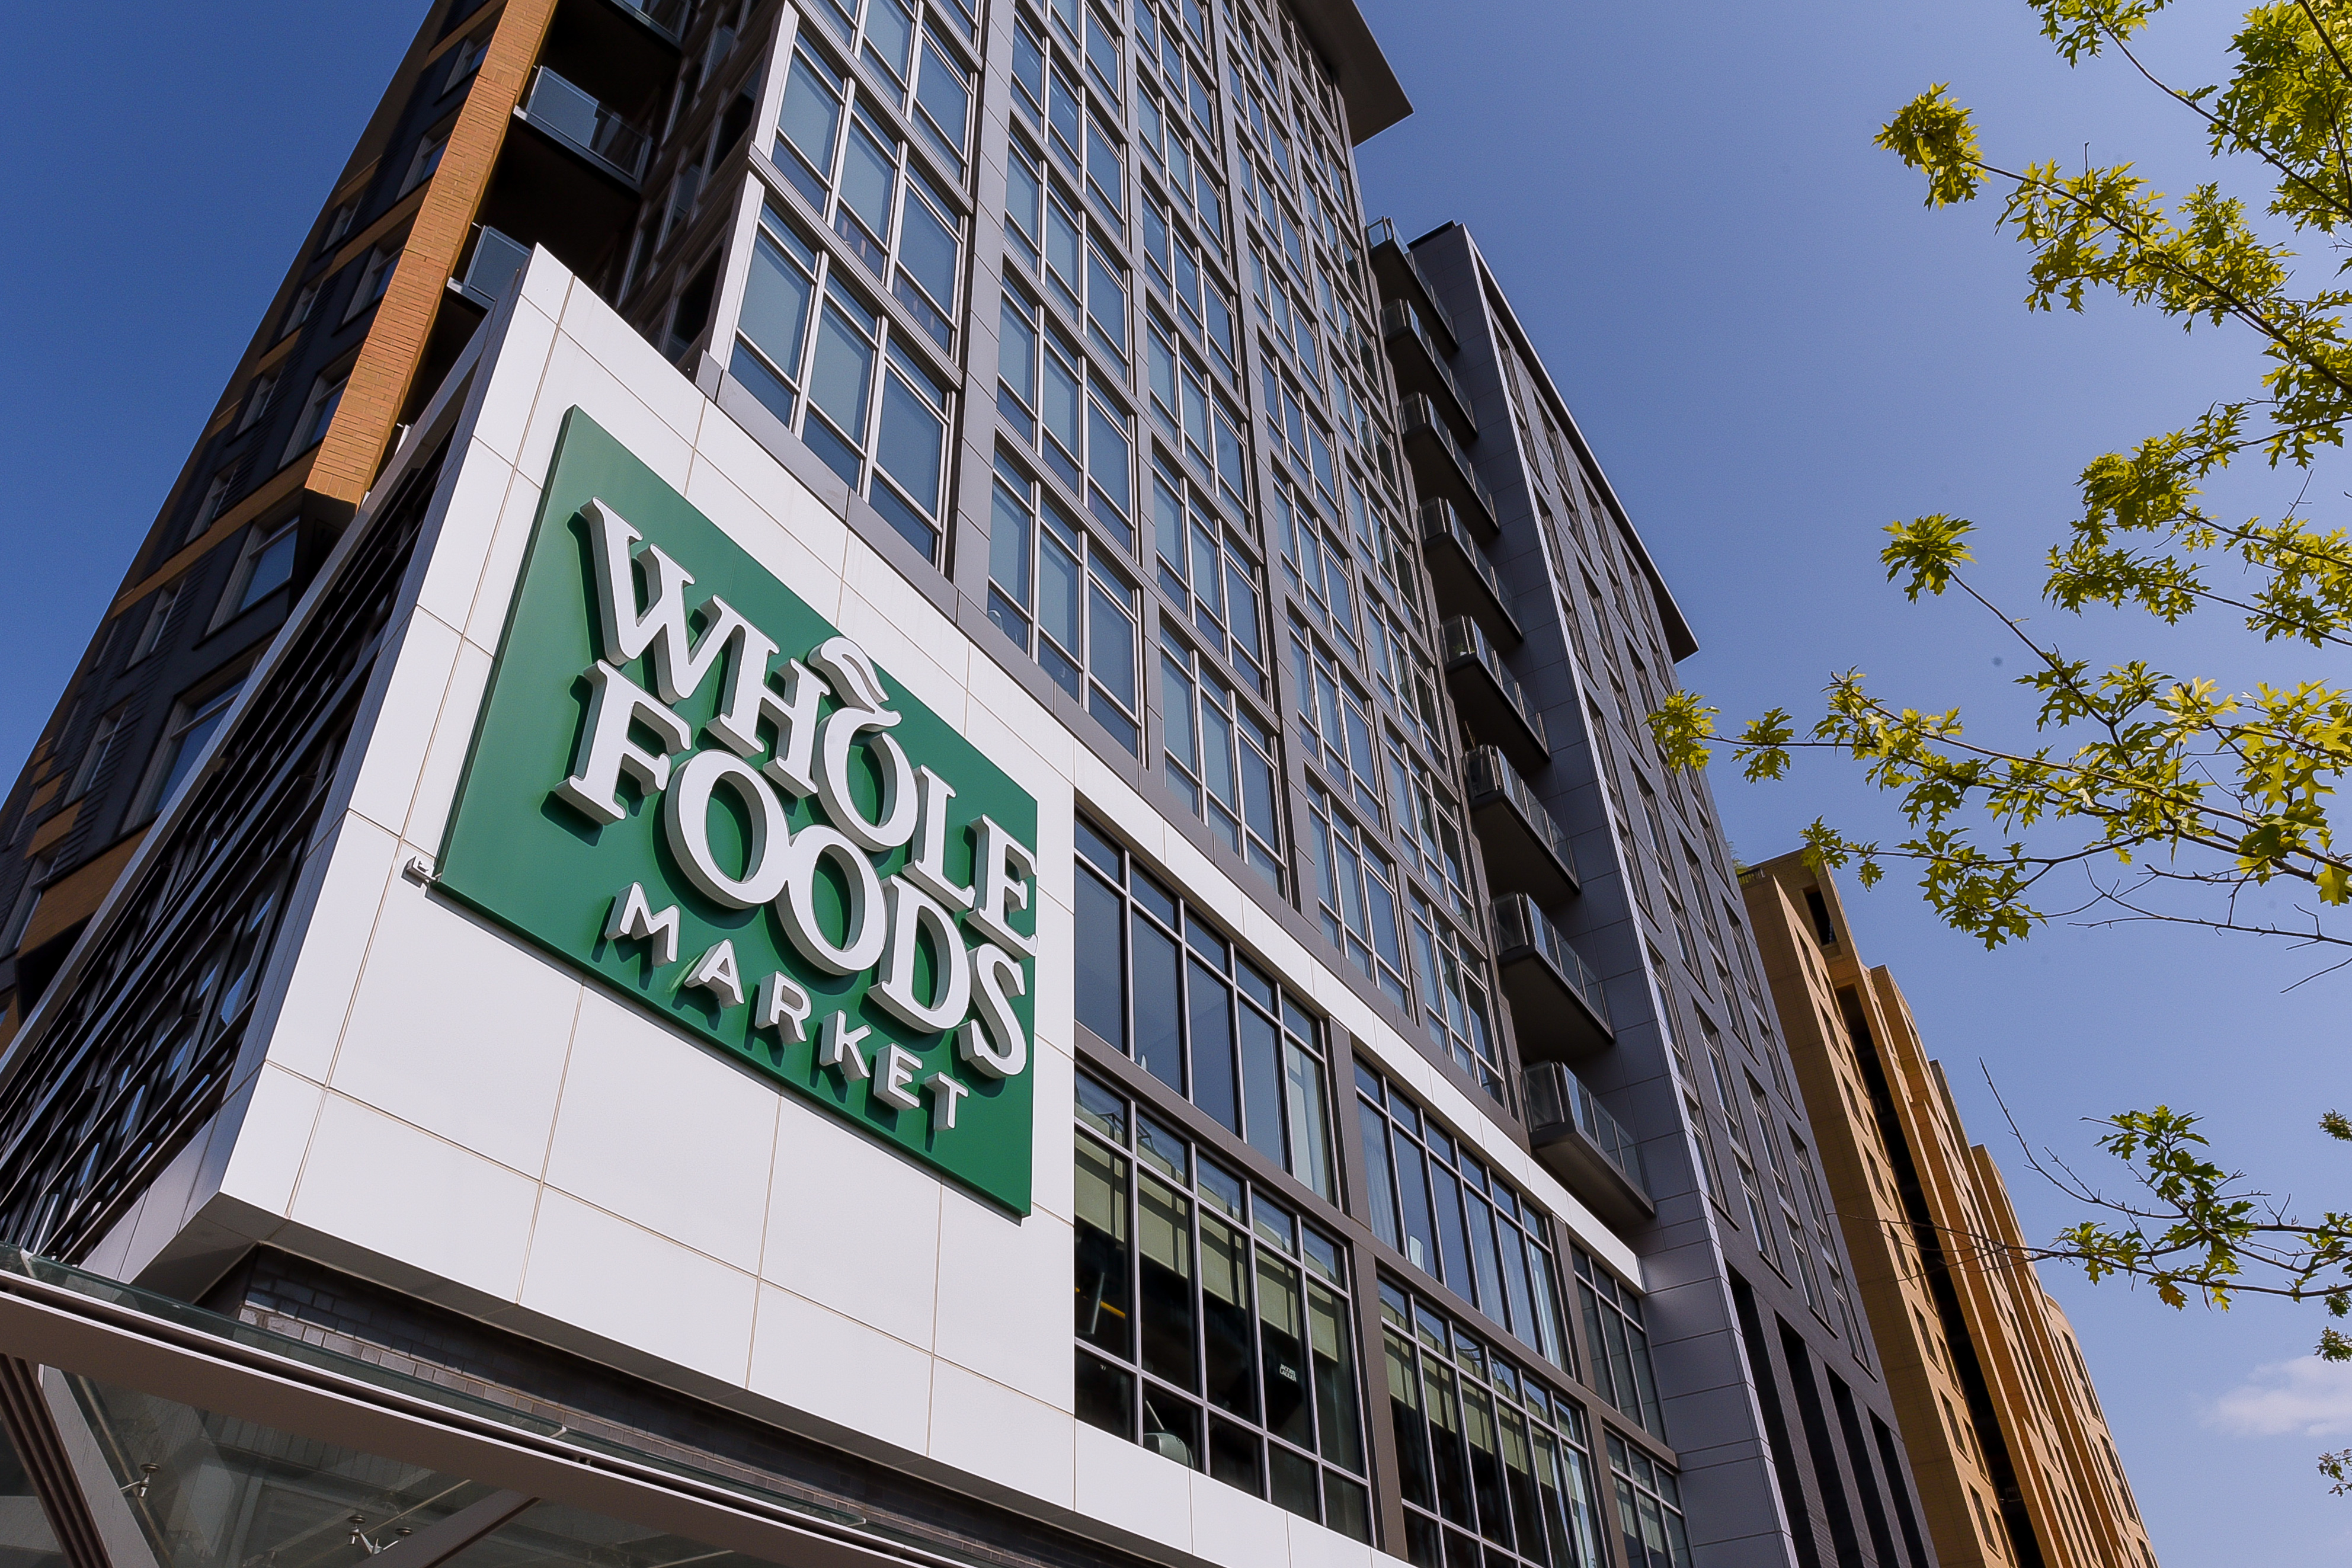 Whole Foods Stores in the City Versus in the Suburbs